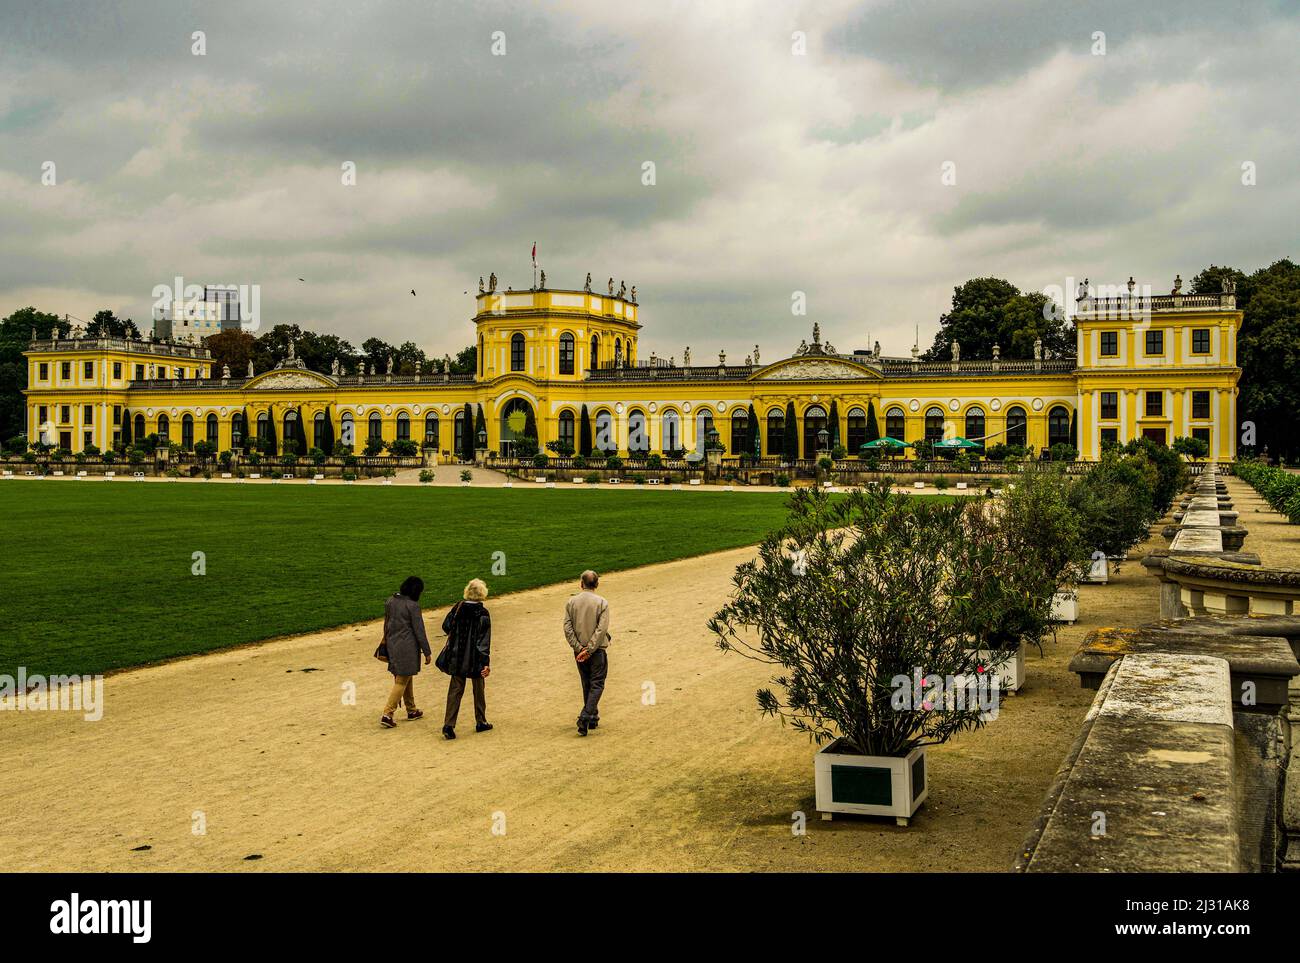 Walk to the Orangery Palace in the Karlsaue in Kassel on a cloudy day, Kassel, Hesse, Germany Stock Photo